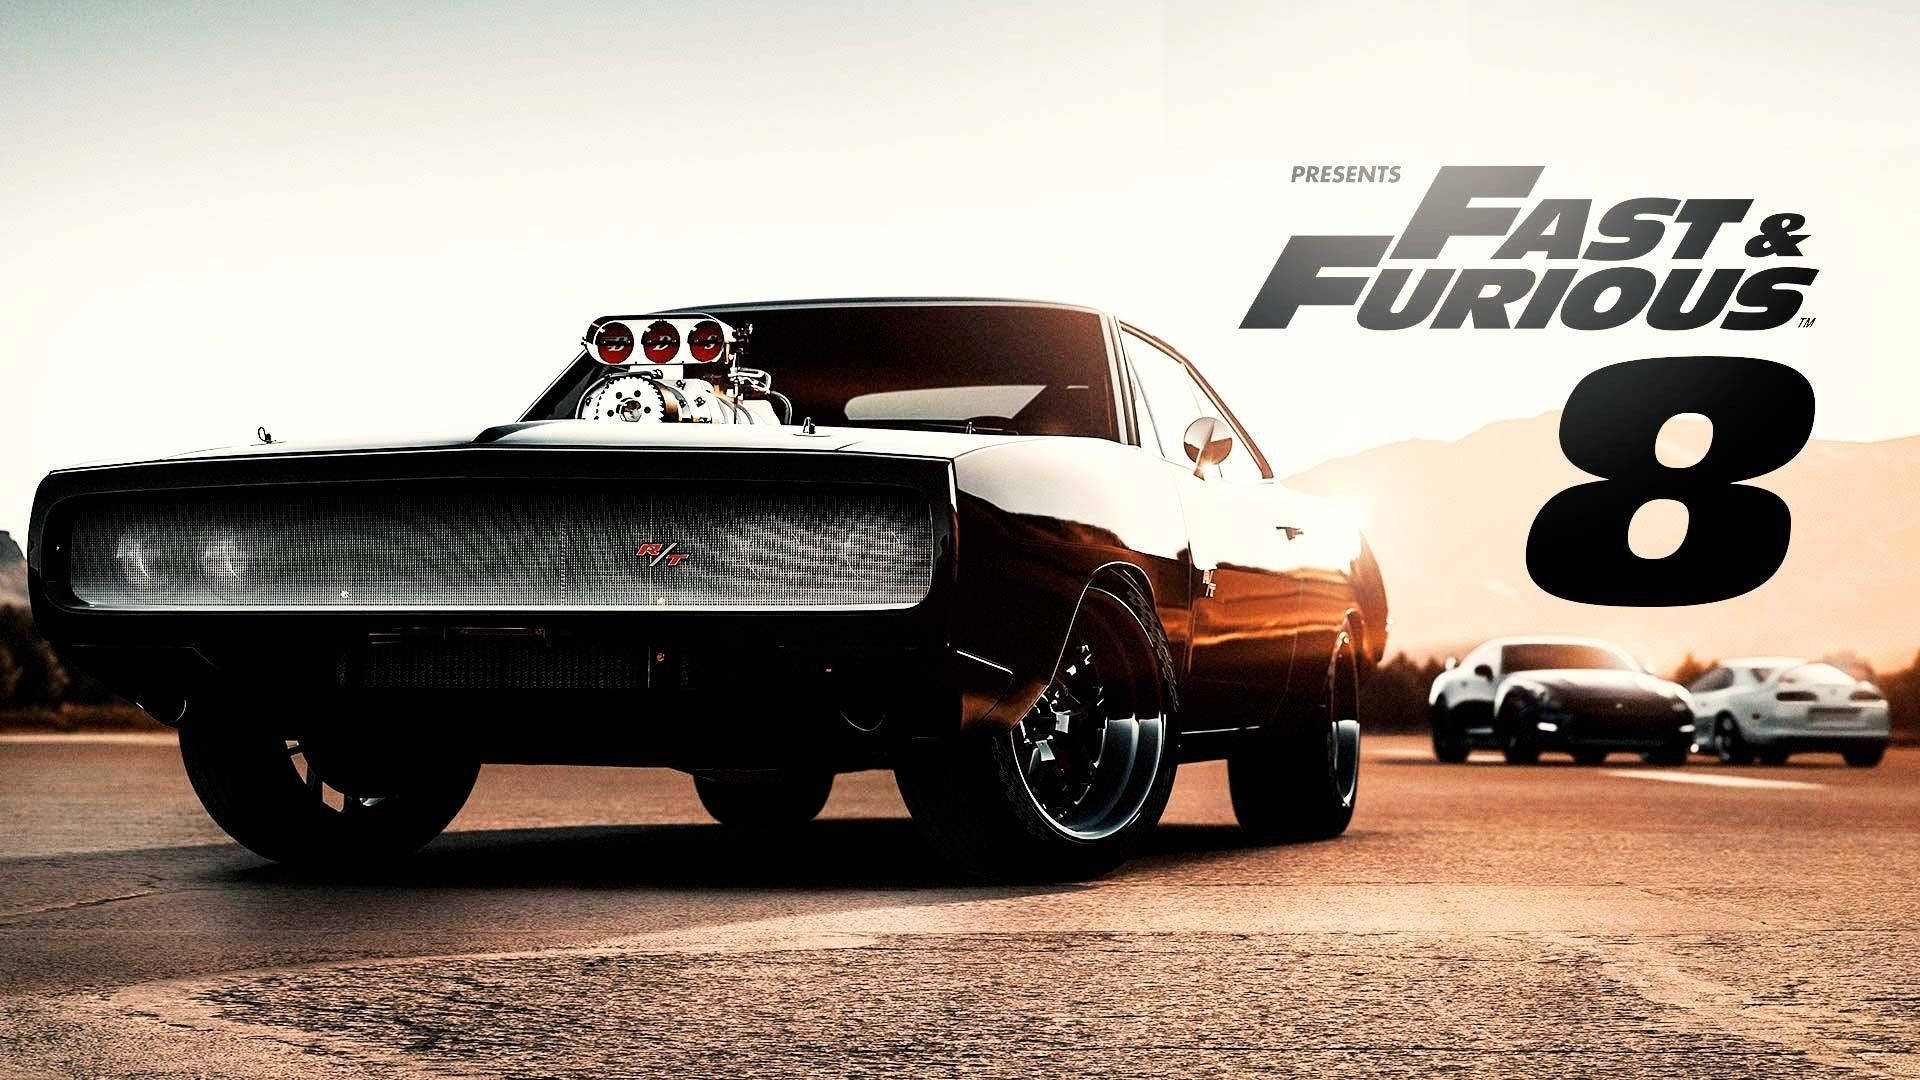 Fast And Furious 8 Dodge Charger Wallpaper